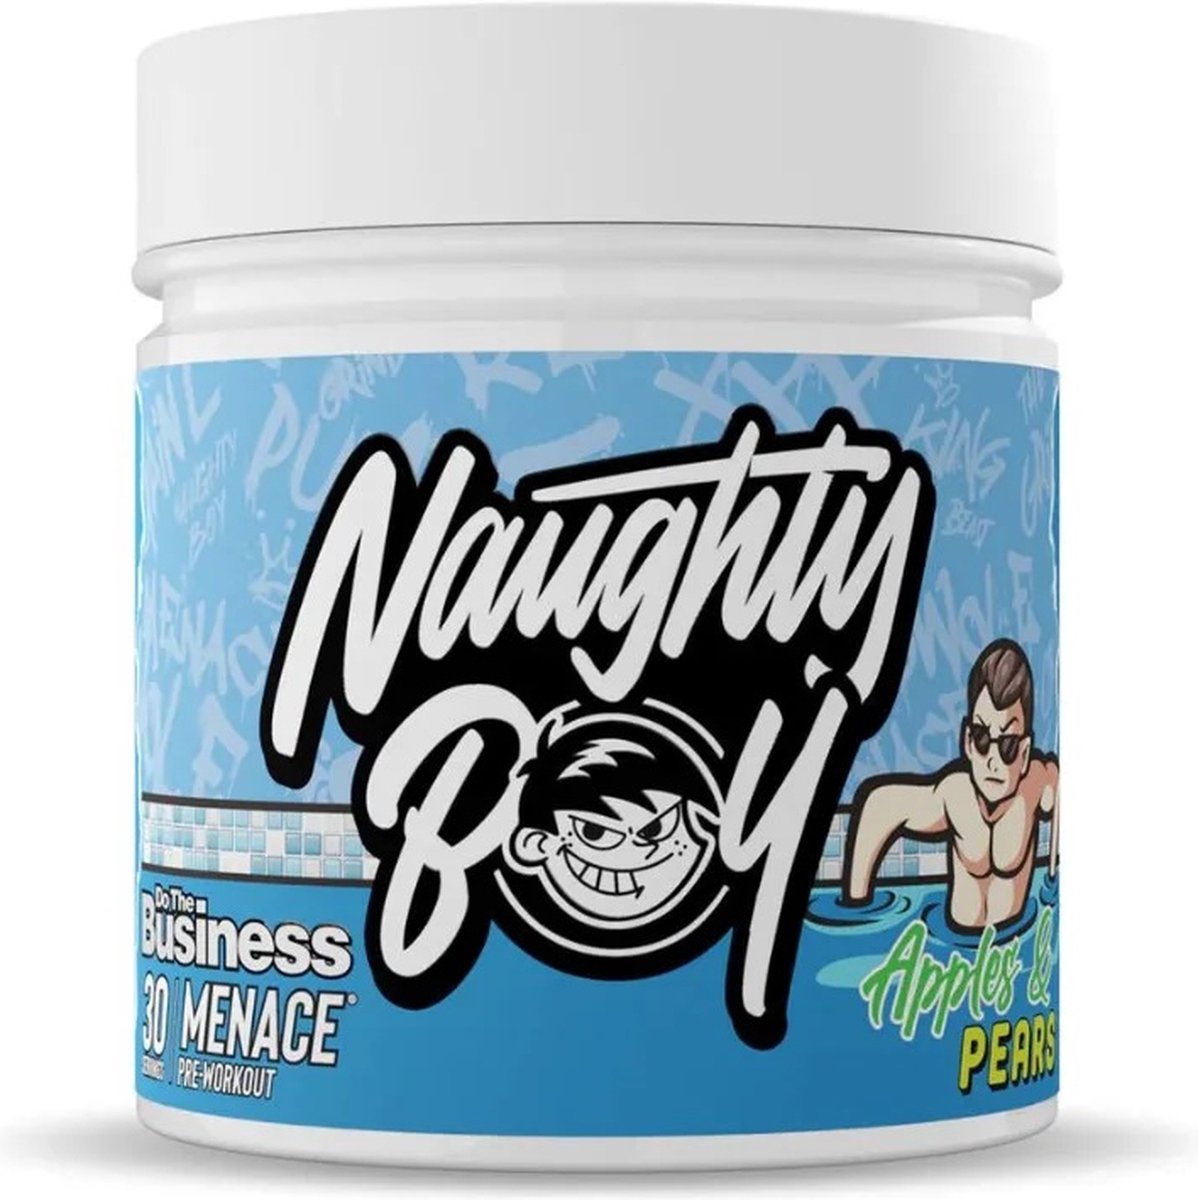 Naughty Boy - Menace Do The Business - Limited editie met S7 - Appel-Peer - 390g